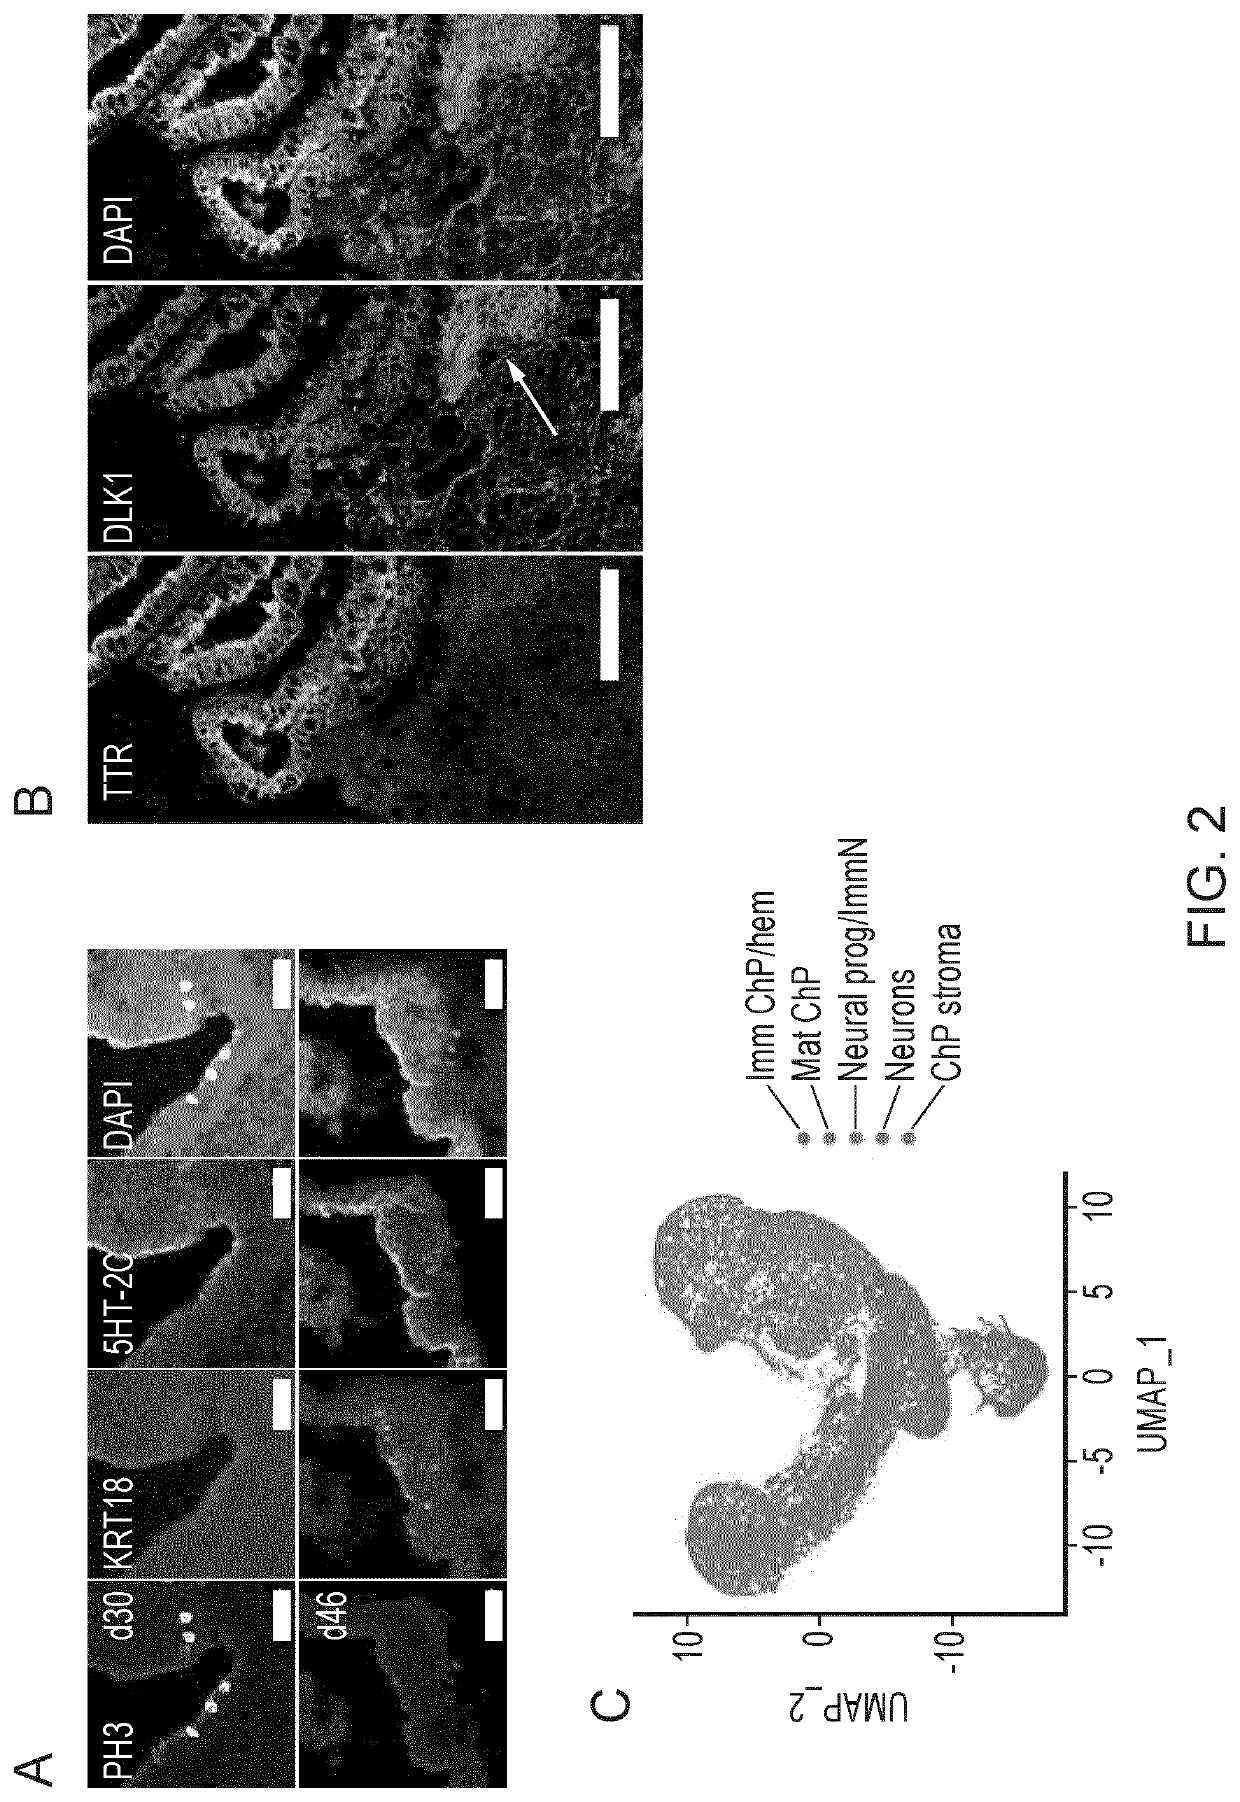 Choroid plexus organoids and methods for production thereof